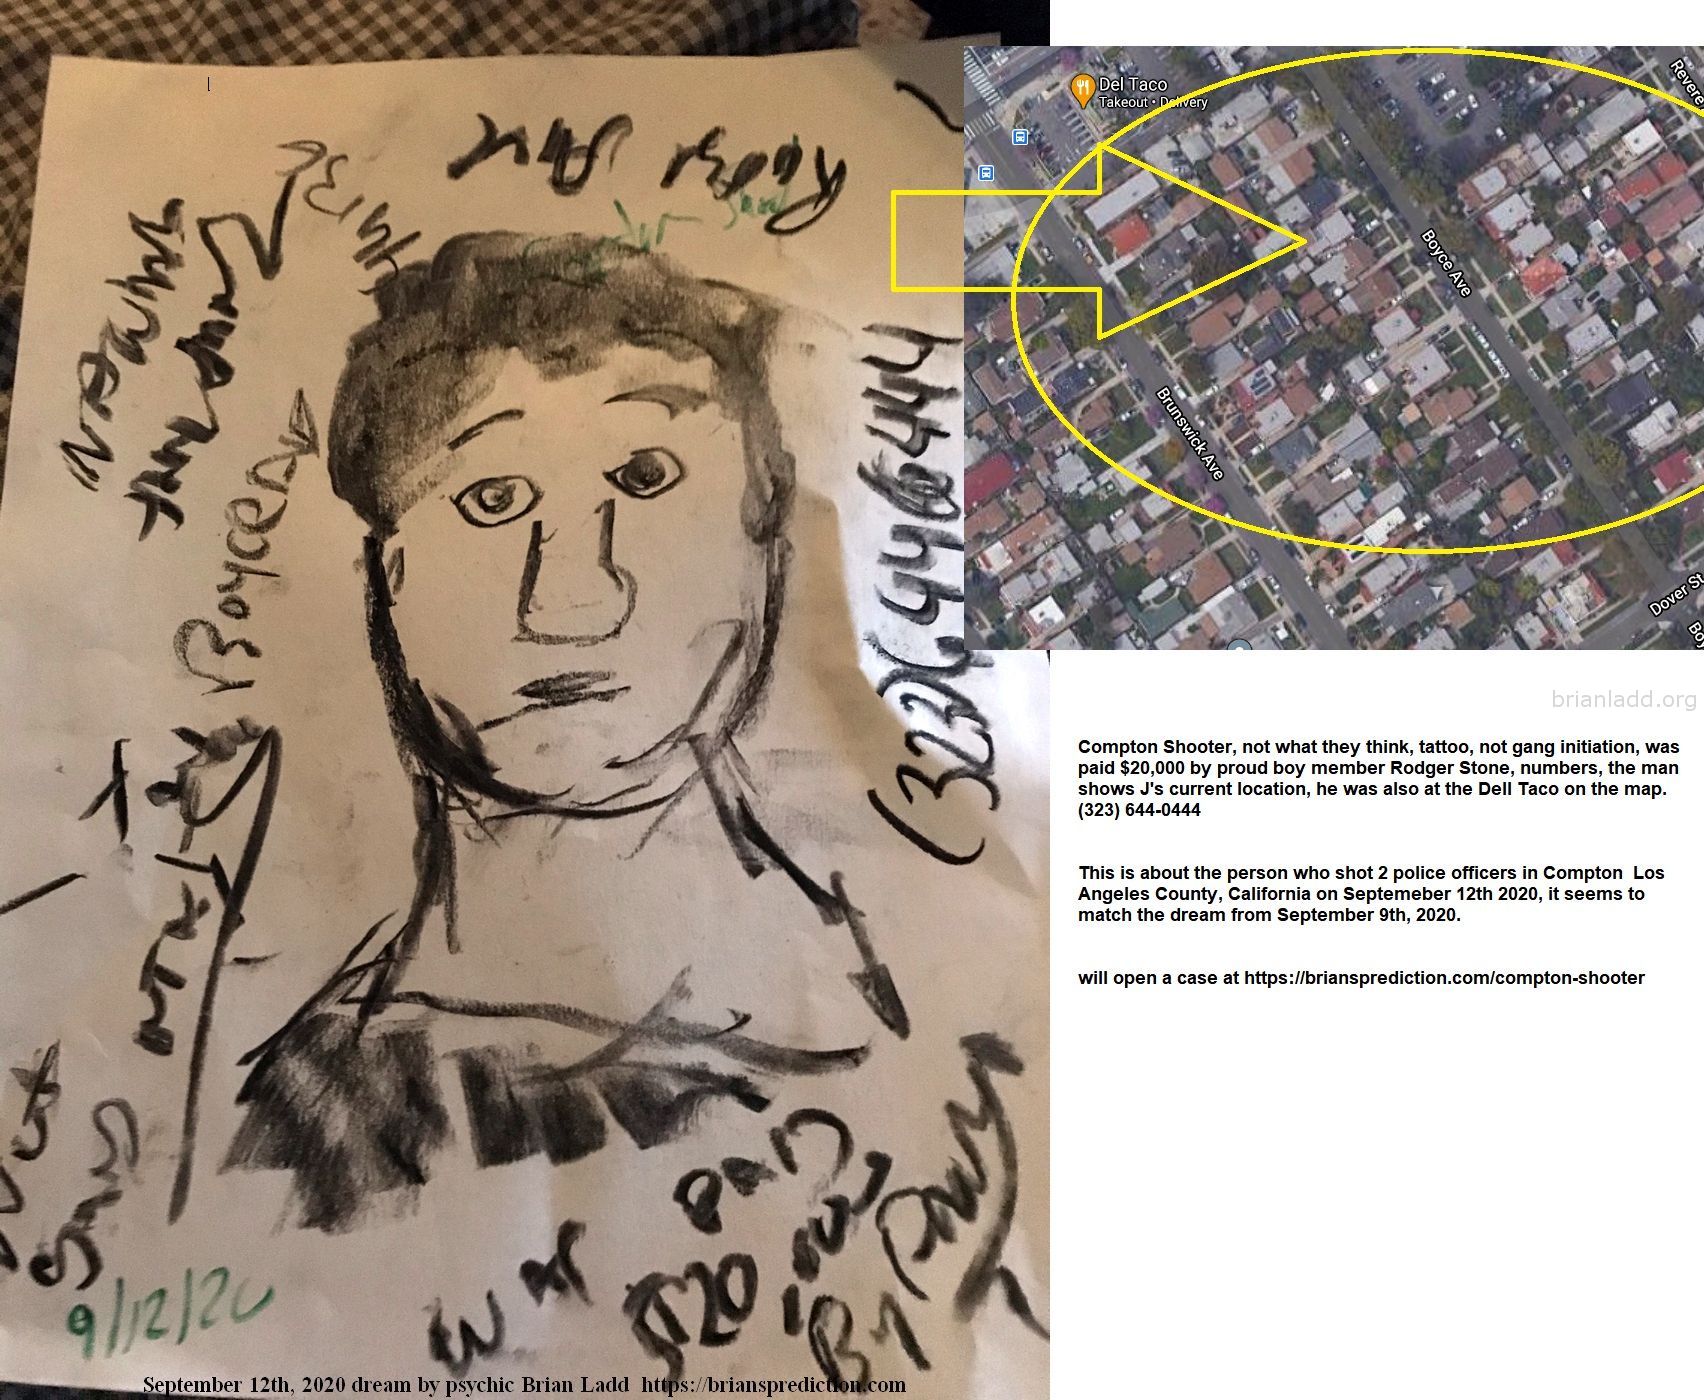 Compton Shooter Not What They Think Tattoo Not Gang Initiation Was Paid 20000 By Proud Boy Member Rodger Stone - Compton...
Compton Shooter, Not What They Think, Tattoo, Not Gang Initiation, Was Paid $20,000 By Proud Boy Member Rodger Stone, Numbers, The Man Shows J'S Current Location, He Was Also At The Dell Taco On The Map. (323) 644-0444  This Is About The Person Who Shot 2 Police Officers In Compton  Los Angeles County, California On Septemeber 12th 2020, It Seems To Match The Dream From September 9th, 2020.  Will Open A Case At   https://briansprediction.com/Compton-Shooter  Case Info  A Massive Search For A Gunman Is Underway As Two Los Angeles County Sheriff'S Department Deputies Are "fighting For Their Lives&Quot; After They Were Shot In The Head In An Ambush At The Metro Station In Compton, Officials Say.  The Incident Happened Saturday At The Metro Blue Line Station At Willowbrook Avenue And Compton Boulevard Around 7 P.M. The Location Is A Short Distance From The Compton Sheriff'S Station.  The Surveillance Video Of The Shooting Shows The Suspect Ambush The Deputies As They Sat In The Patrol Vehicle. A Man Clad In Dark Clothing Walks Up To The Parked Vehicle At The Metro Station, Approaches The Window On The Passenger'S Side, And Fires Several Times At The Close Range. The Suspect Then Runs Off On Foot. One Deputy Is Seen Emerging From The Passenger Side And Stumbling Around On Foot For Several Seconds Before The Video Ends. Both Deputies Sustained Multiple Gunshot Wounds And Underwent Surgery At A Local Hospital. They Were Described As Alive But In Critical Condition.  "That Was A Cowardly Act,&Quot; Sheriff Alex Villanueva Said. "The Two Deputies Were Doing Their Job, Minding Their Own Business, Watching Out For The Safety Of The People On The Train."  "To See Somebody Just Walk Up And Start Shooting On Them. It Pisses Me Off. It Dismays Me At The Same Time. There'S No Pretty Way To Say It."  One Deputy Was Described As A 31-Year-Old Mother Of A 6-Year-Old Boy. Her Husband Came To St. Francis Medical Center In Lynwood After The Shooting.  The Other Deputy Was A 24-Year-Old Man And His Girlfriend And Parents Came To The Hospital.  Villanueva Said He Swore In Both Deputies To The Office Just 14 Months Ago In The Same Class.  Officials Were Not Able To Get A Detailed Description Of The Shooter Other Than A Man. Officials Cautioned That The Surveillance Video Released From The Scene Uses A Fisheye Lens So The Suspect'S Height And Weight May Be Slightly Distorted From Reality.  The Department Tweeted: "Moments Ago, 2 Of Our Sheriff Deputies Were Shot In Compton And Were Transported To A Local Hospital. They Are Both Still Fighting For Their Lives, So Please Keep Them In Your Thoughts And Prayers."
